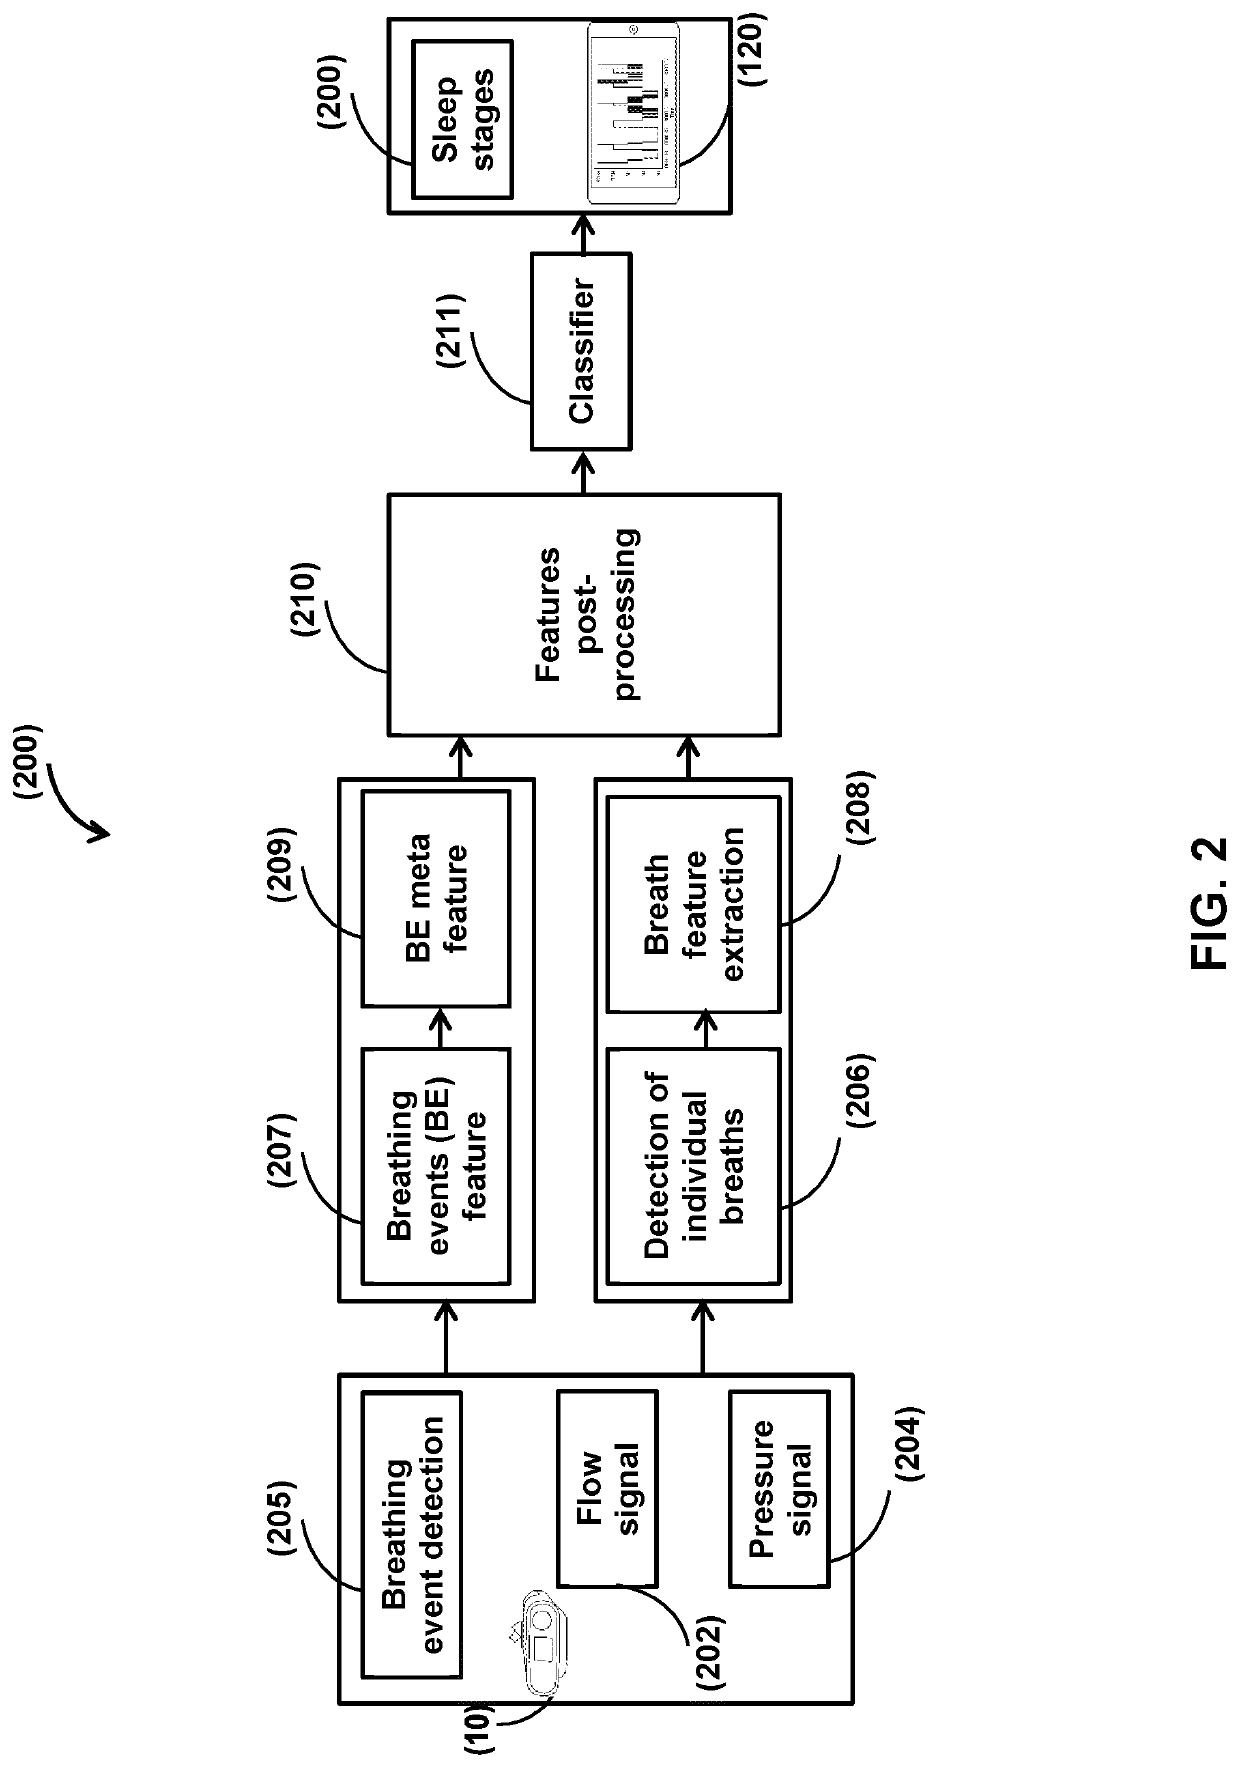 Systems and methods for sleep staging